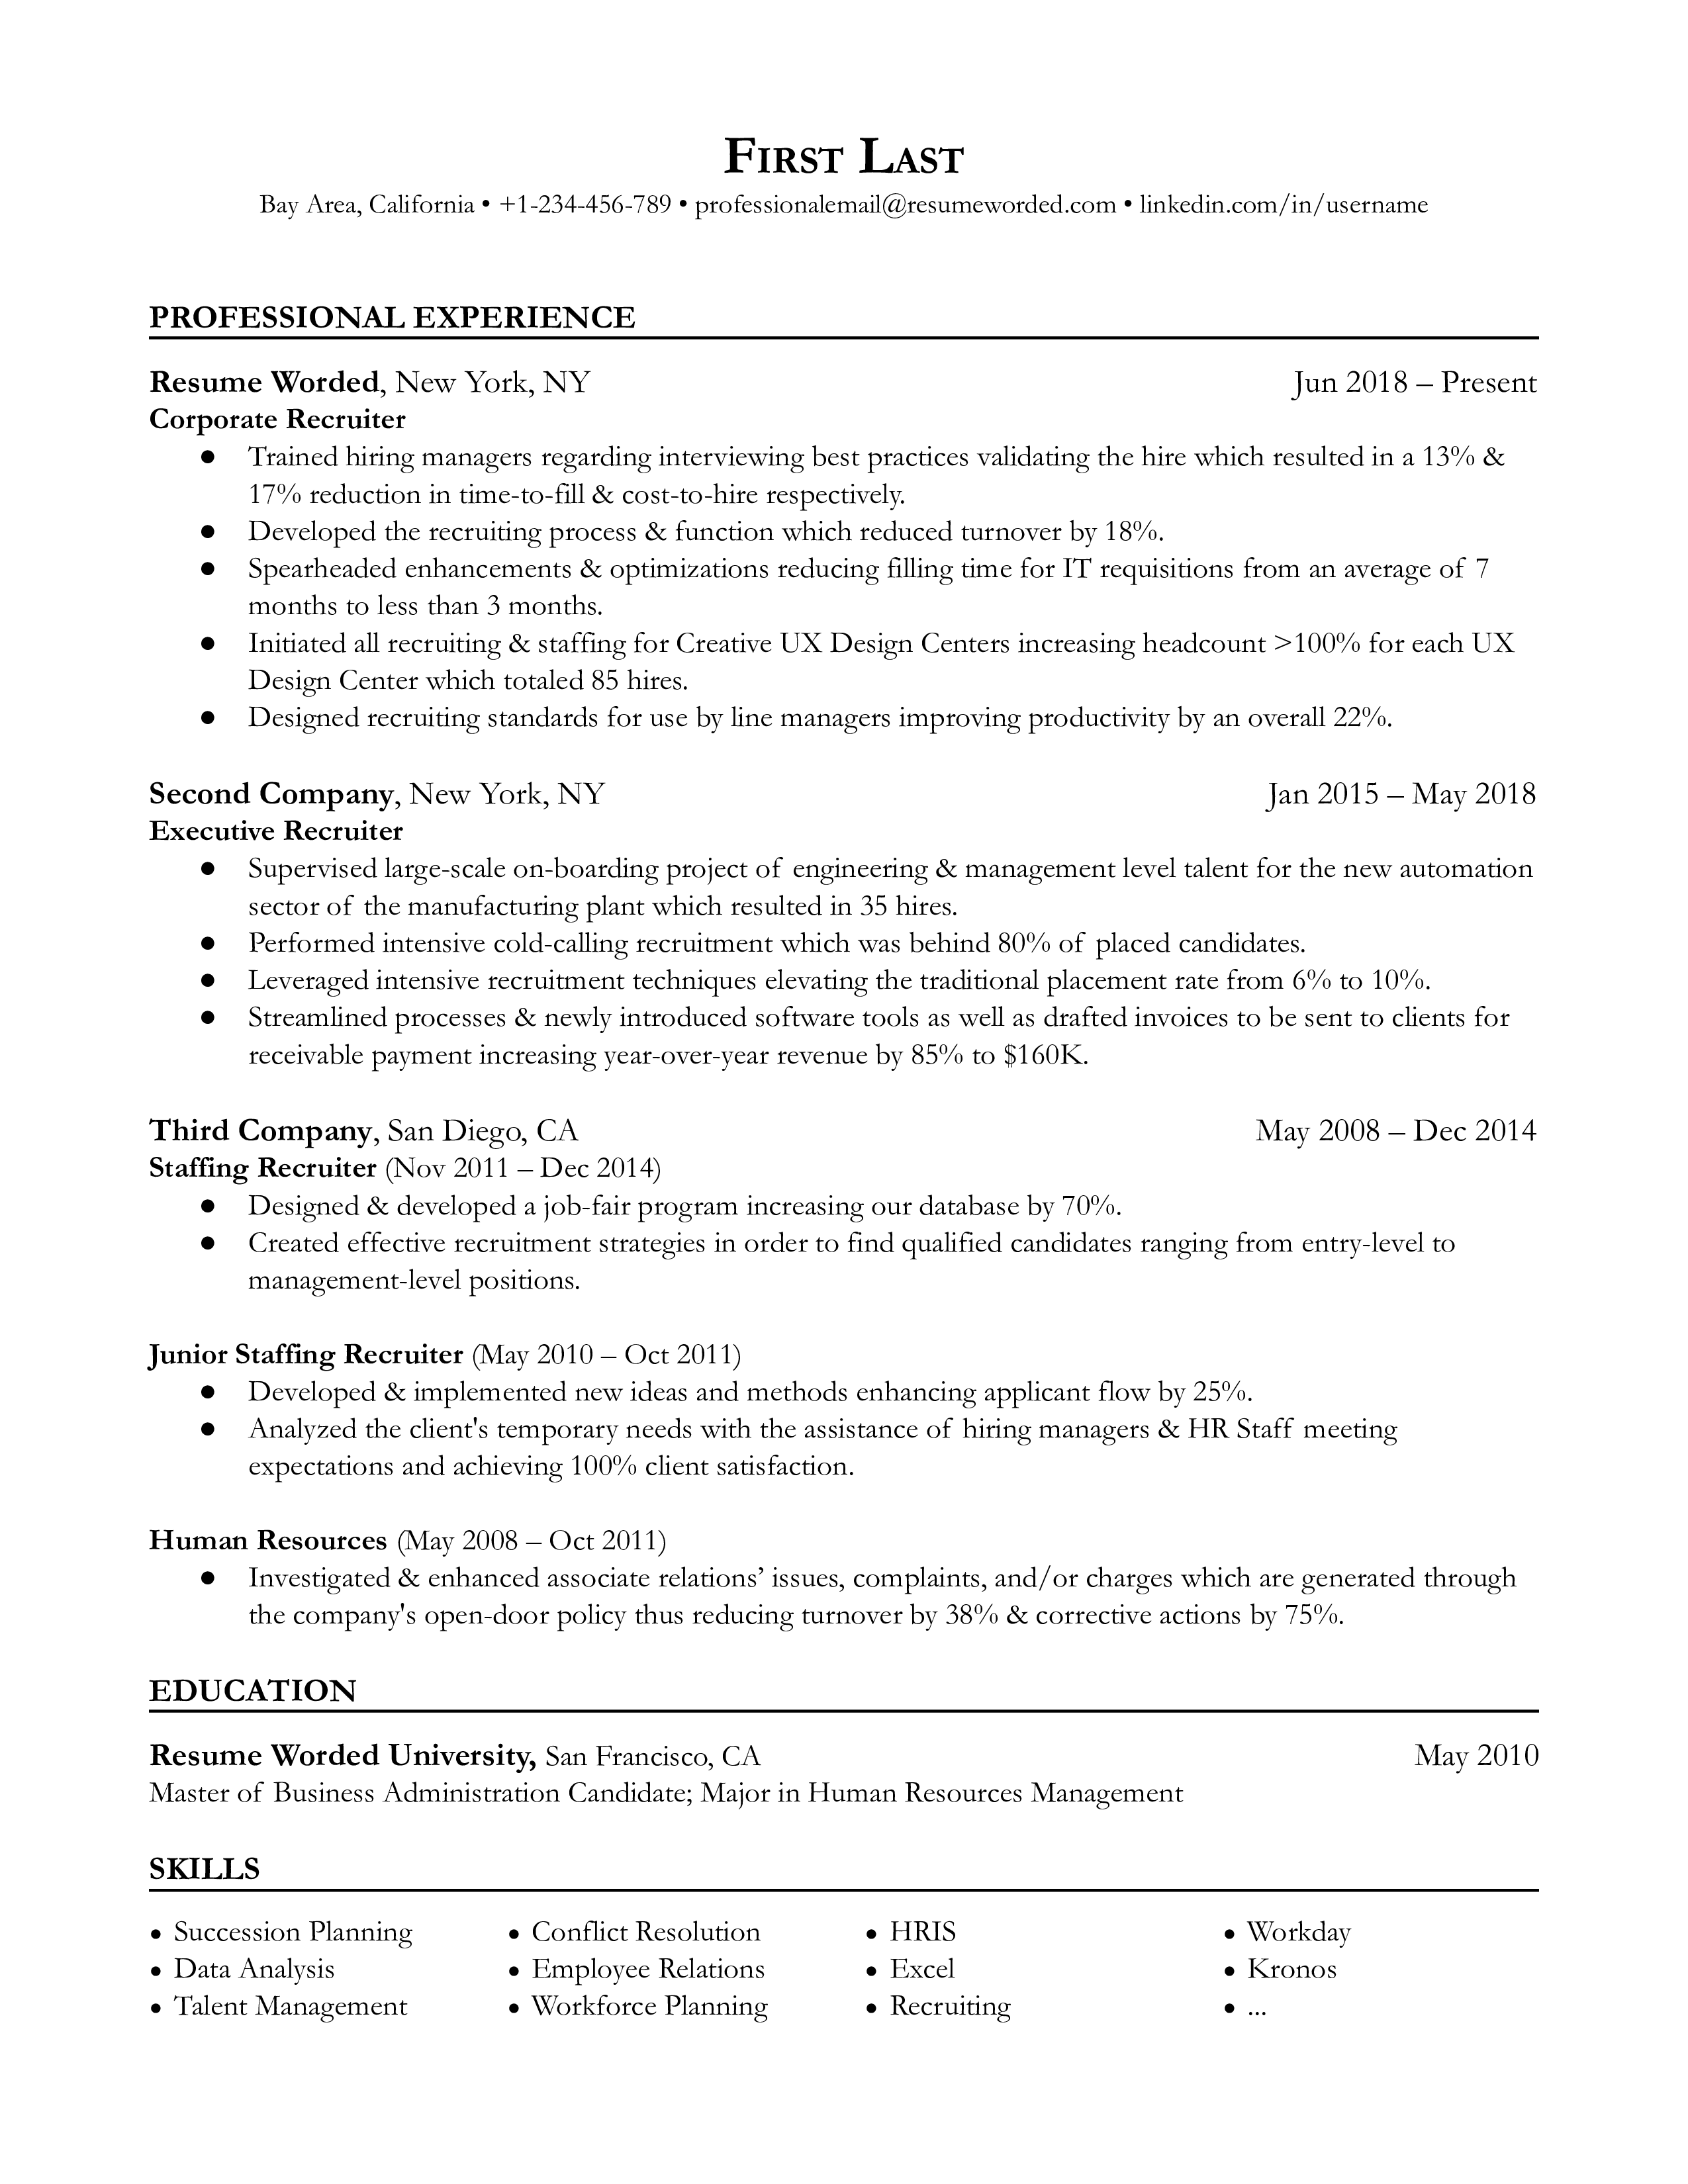 Corporate recruiter resume sample that highlights an applicant's vast experience and educational background.